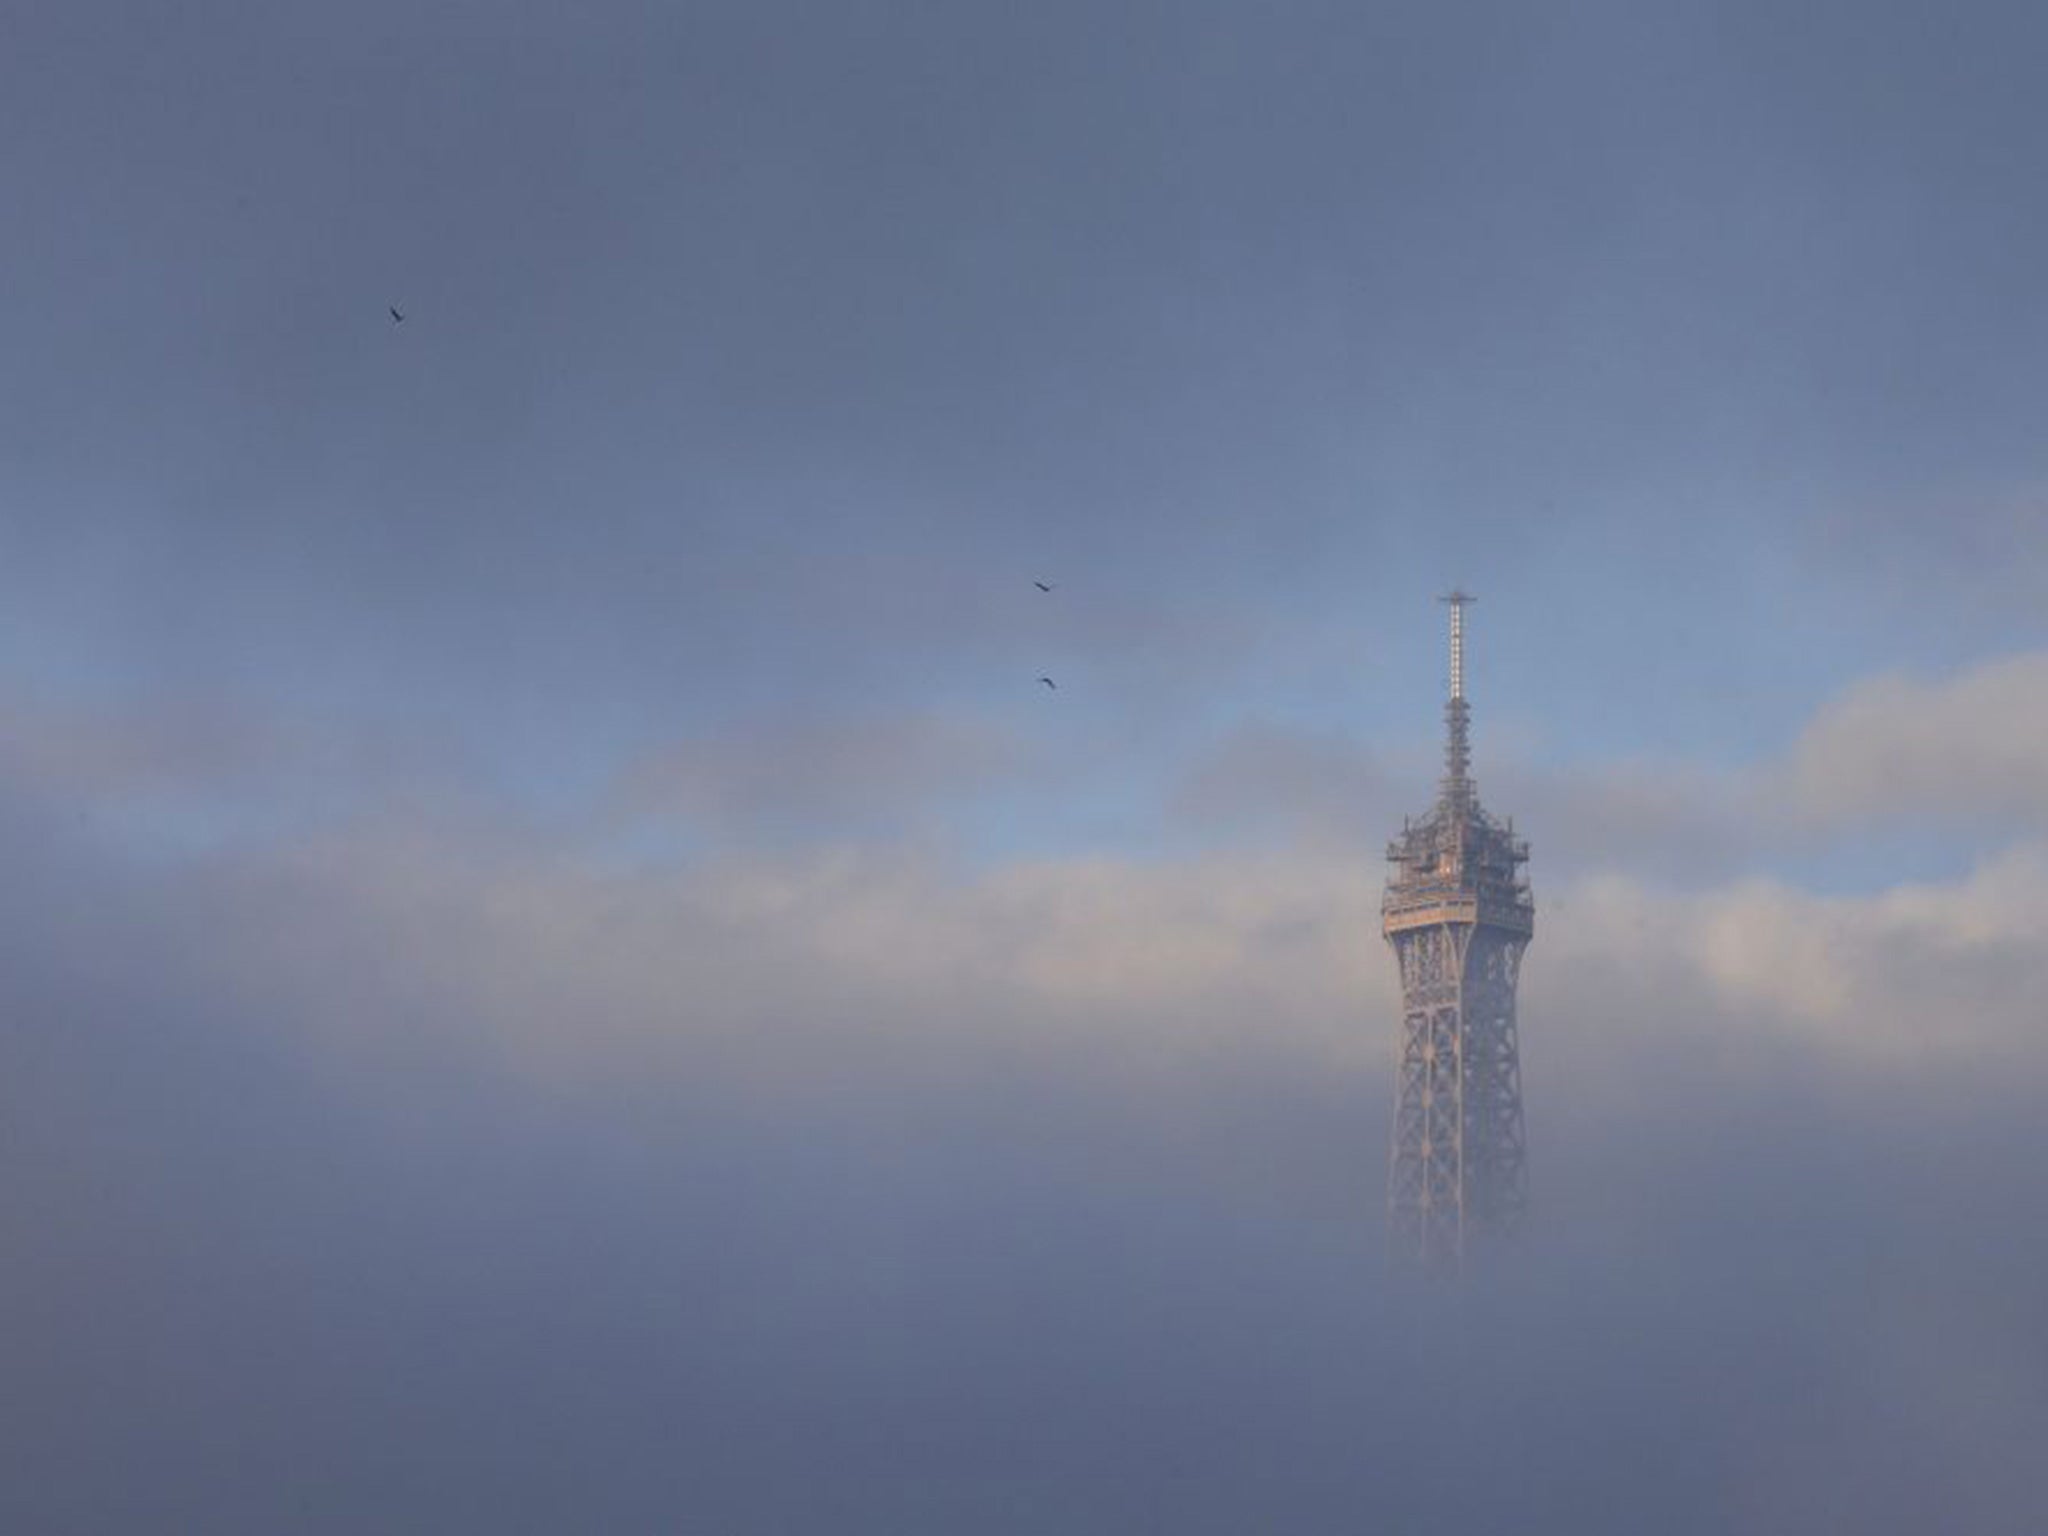 The Eiffel Tower is partially covered by an early morning fog in Paris, France, November 27, 2015 as the capital will host the World Climate Change Conference 2015 (COP21) from November 30 to December 11